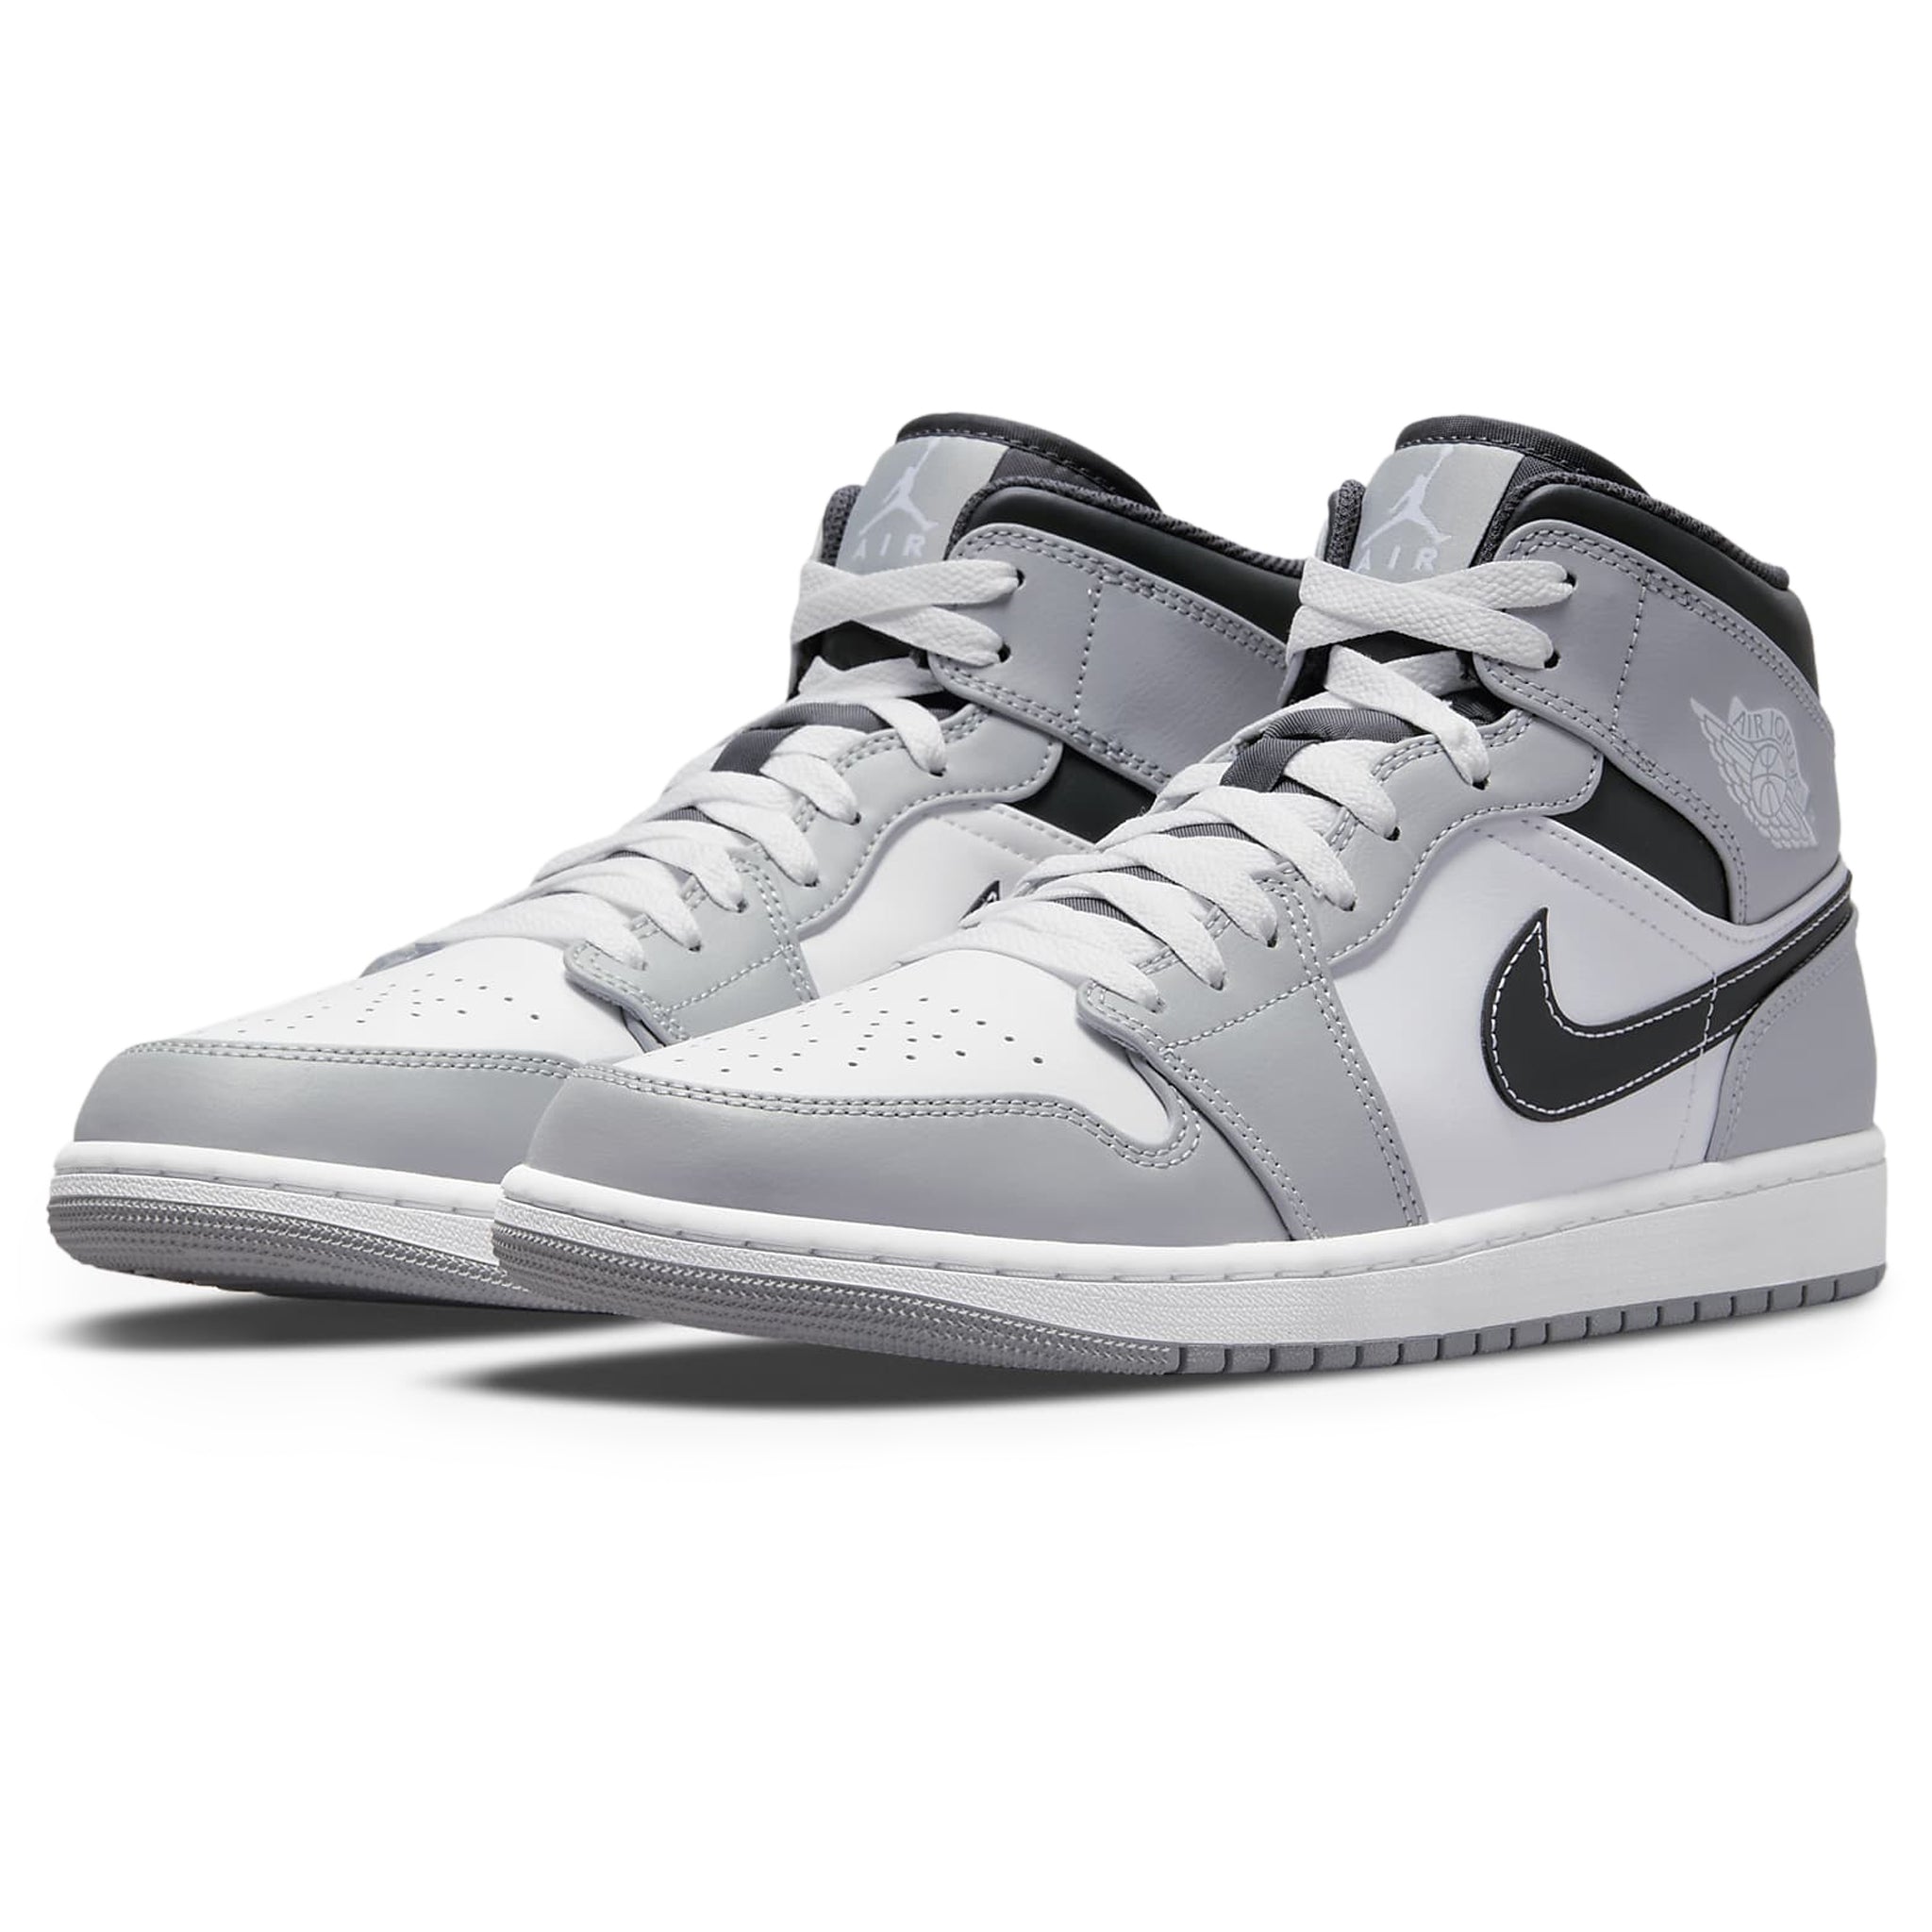 Front side view of Air Jordan 1 Mid Light Smoke Grey Anthracite 554724-078